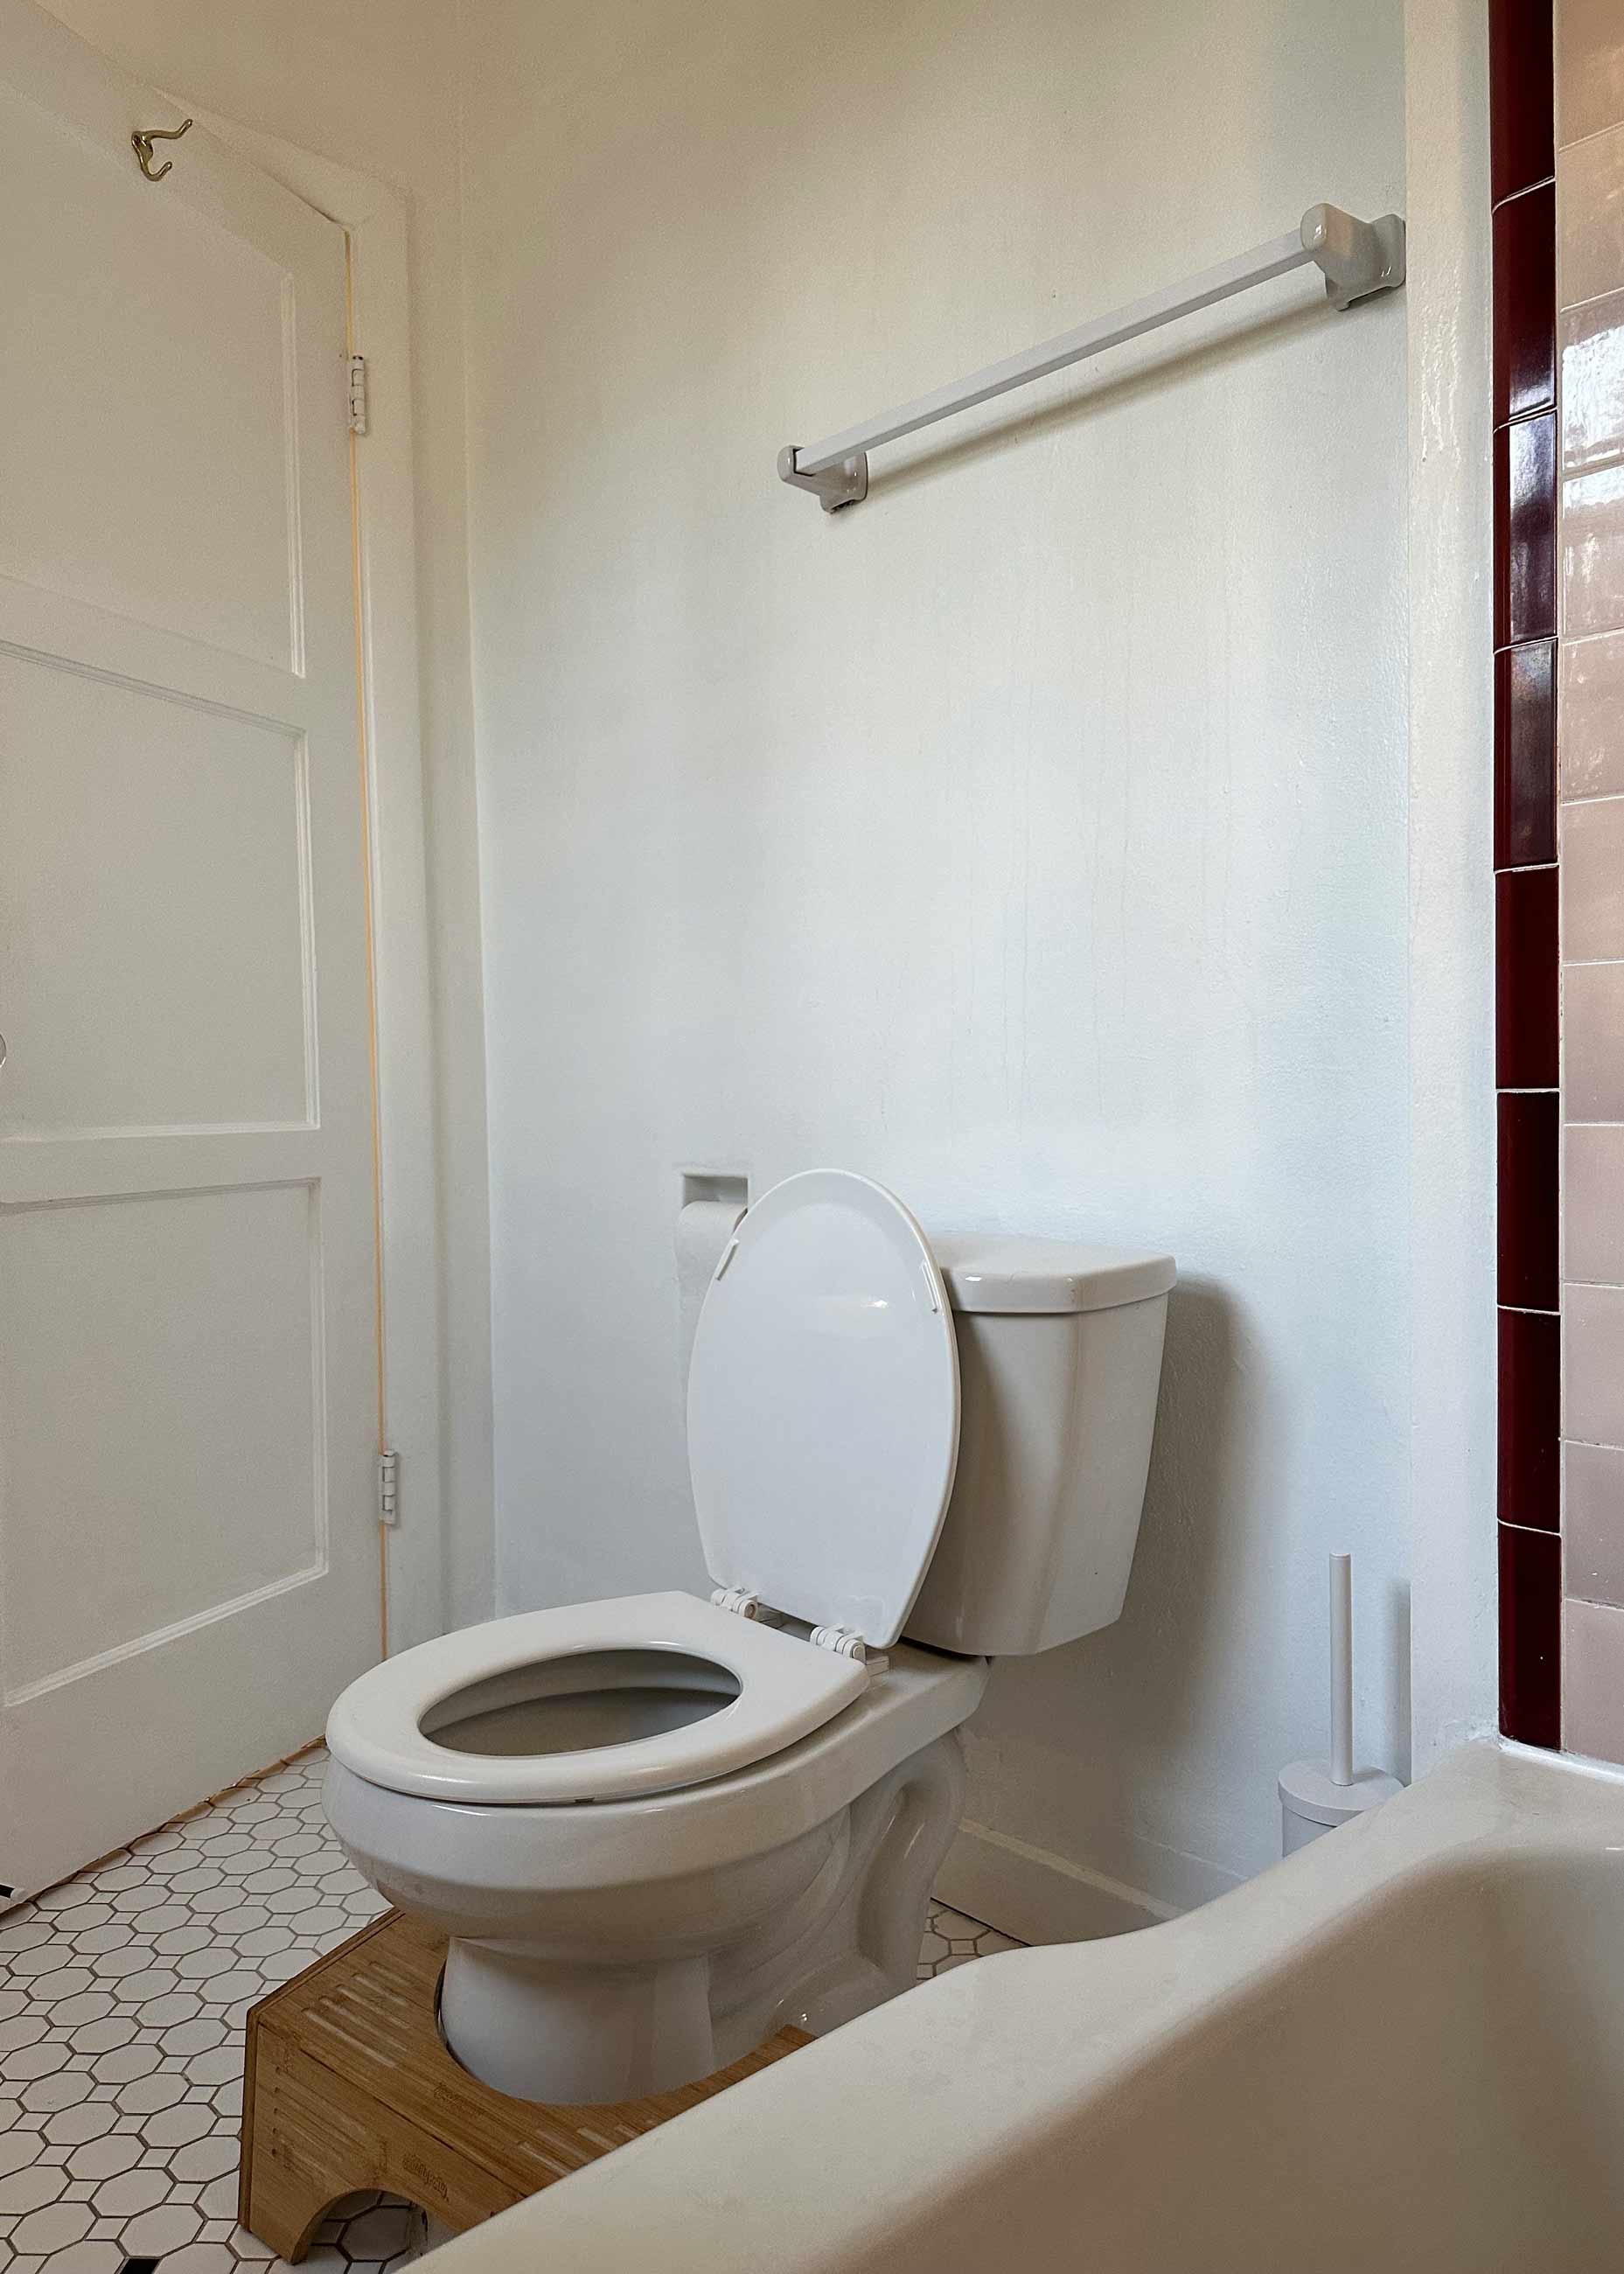 Before image of rental bathroom with plain white wall and outdated hardware.